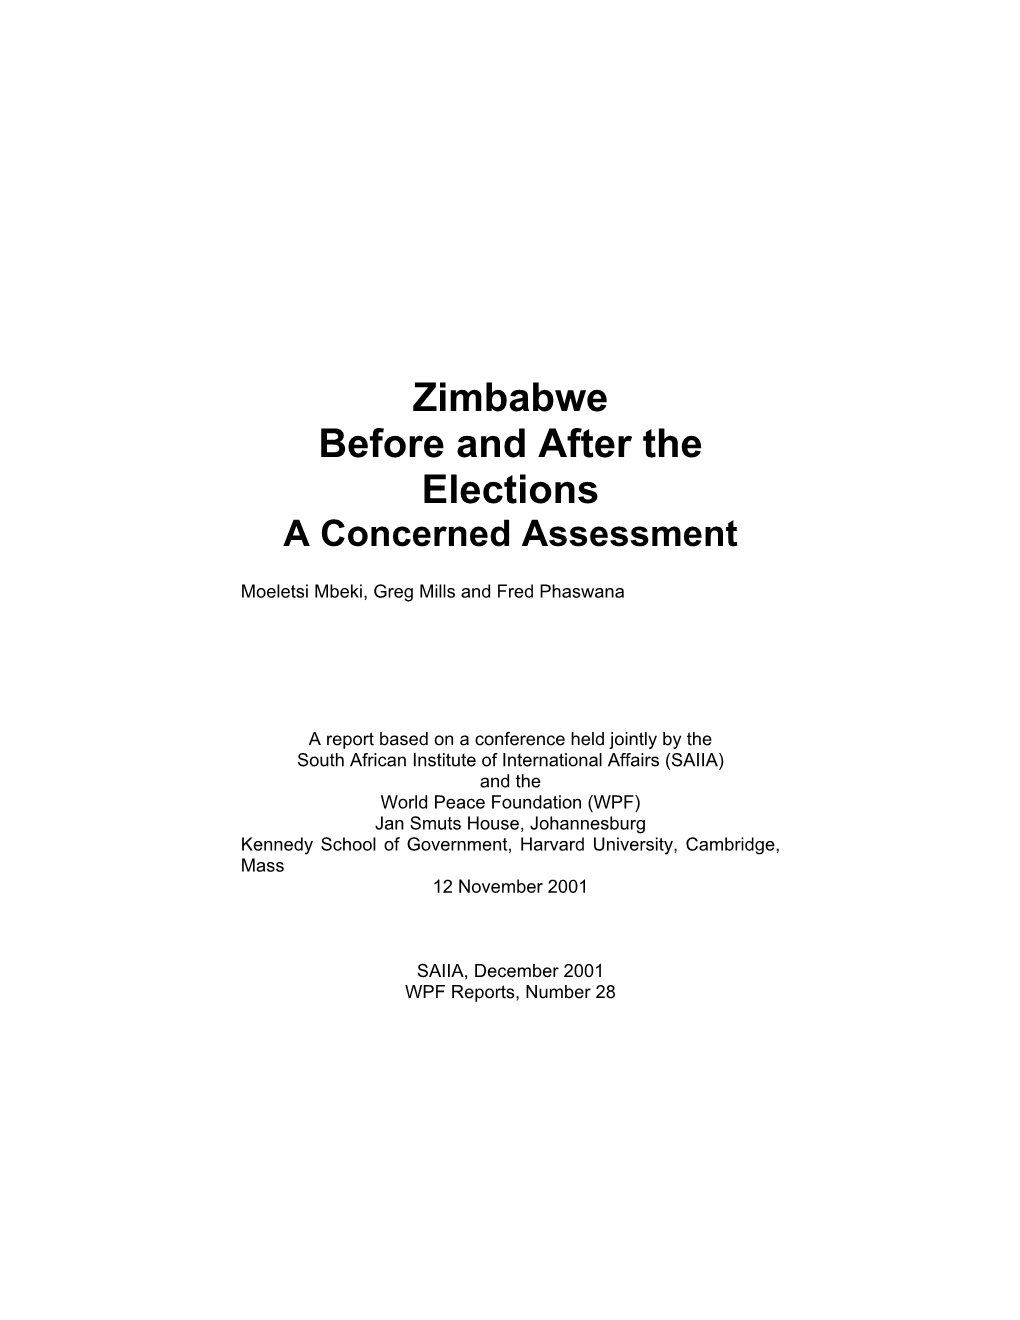 Zimbabwe Before and After the Elections a Concerned Assessment